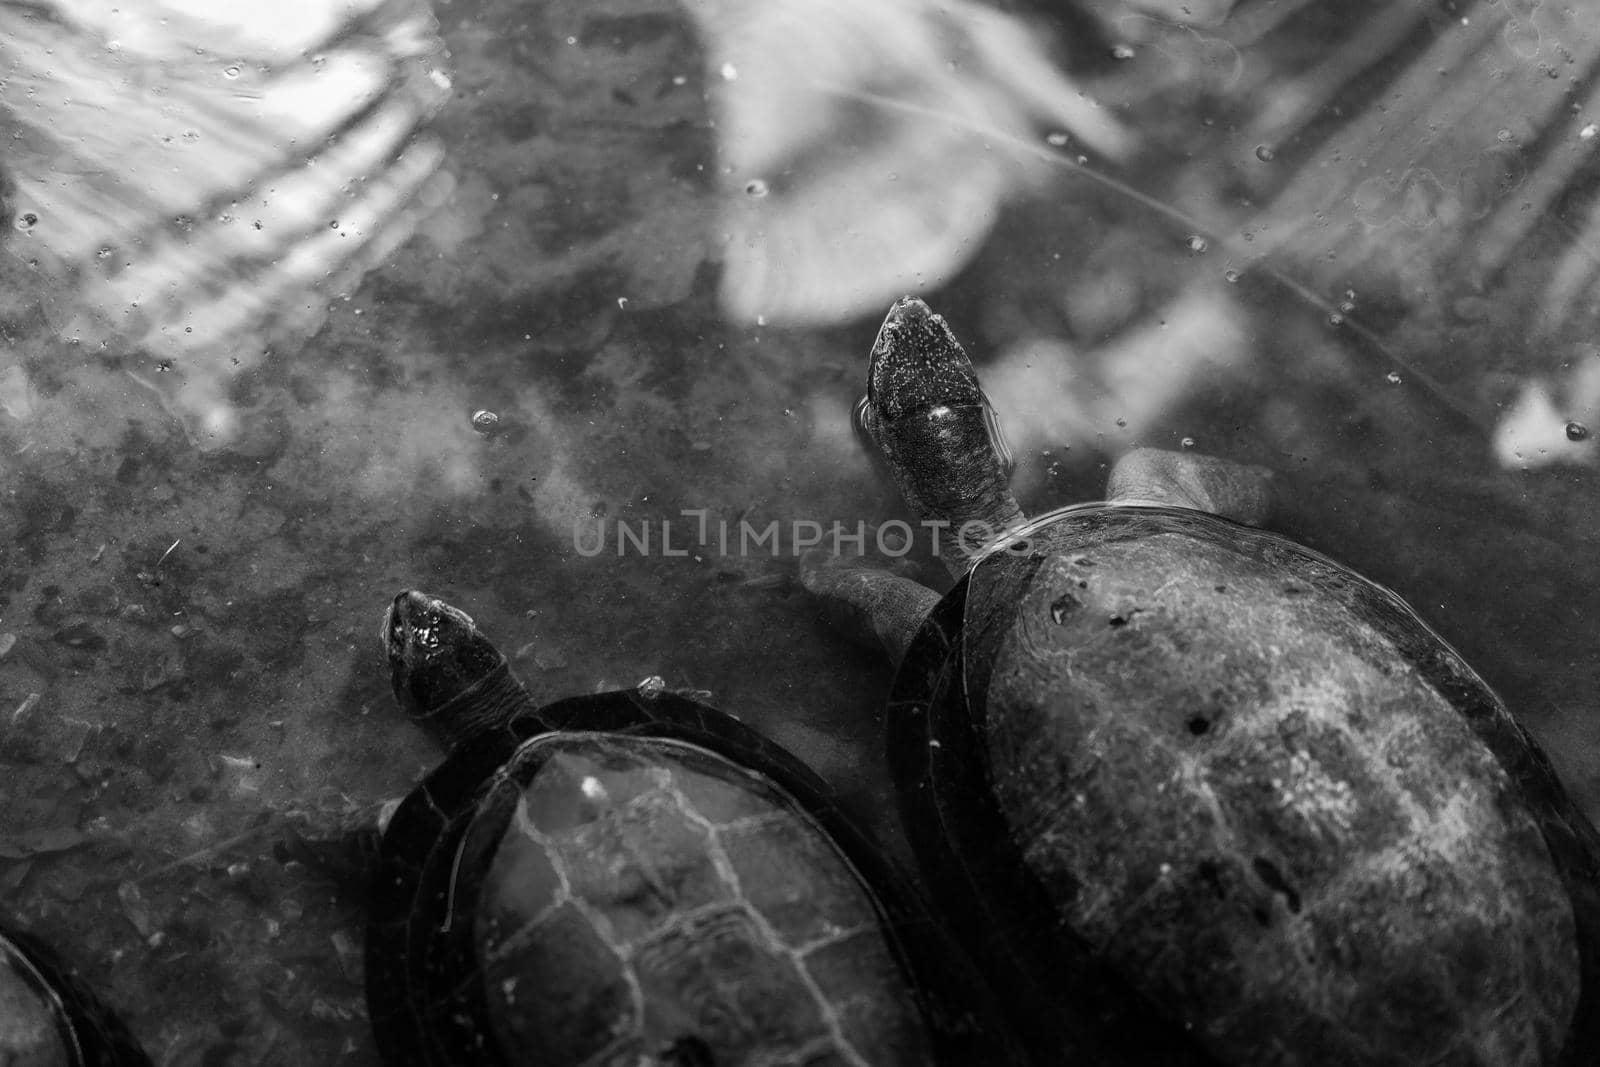 The turtles in the water